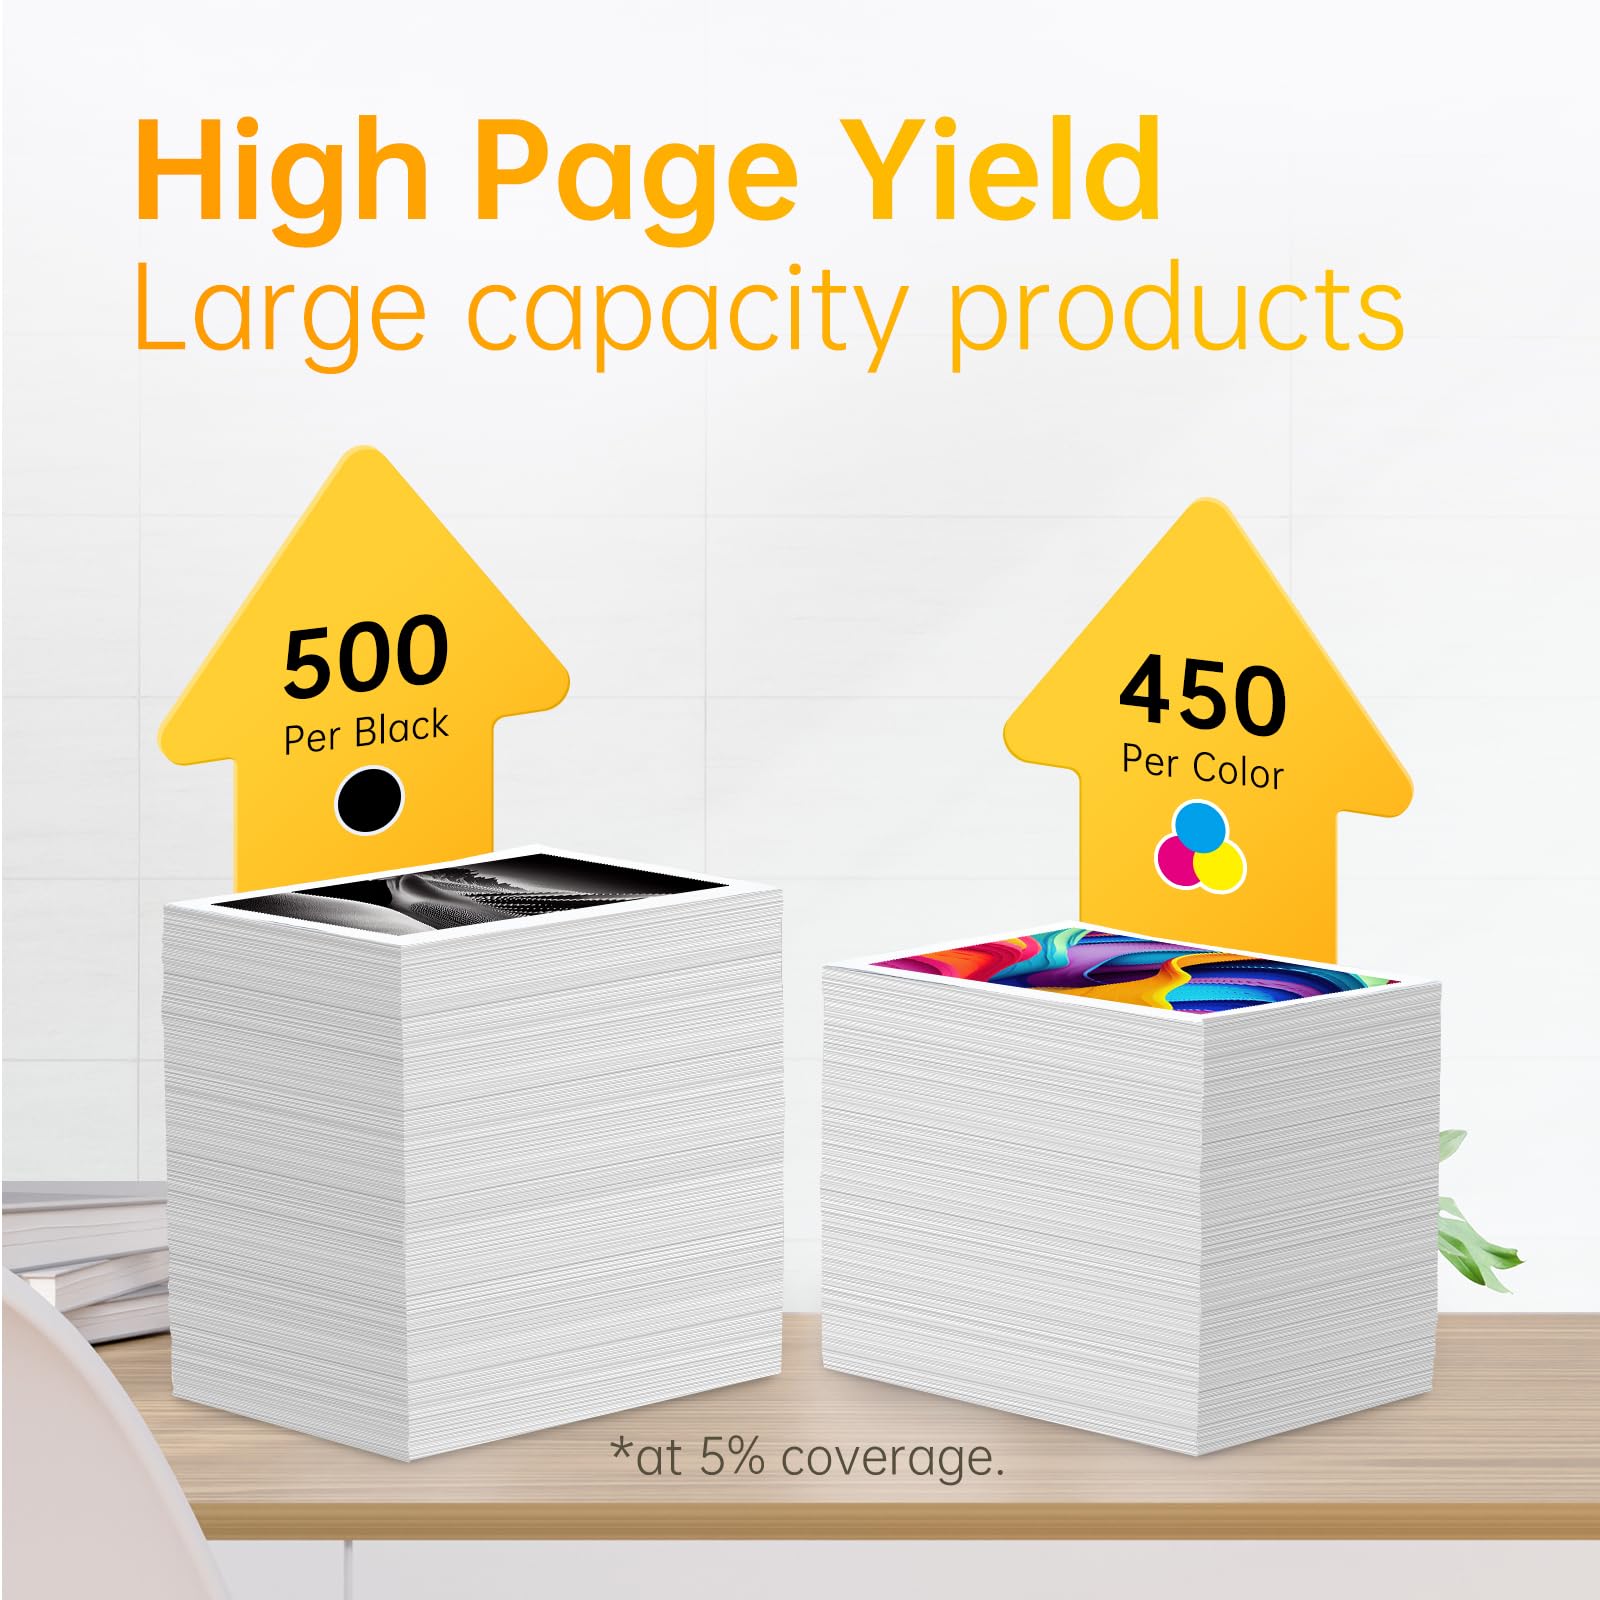 High page yield displayed for Epson Ink 220XL Cartridges, emphasizing large capacity with 500 pages per black and 450 per color.